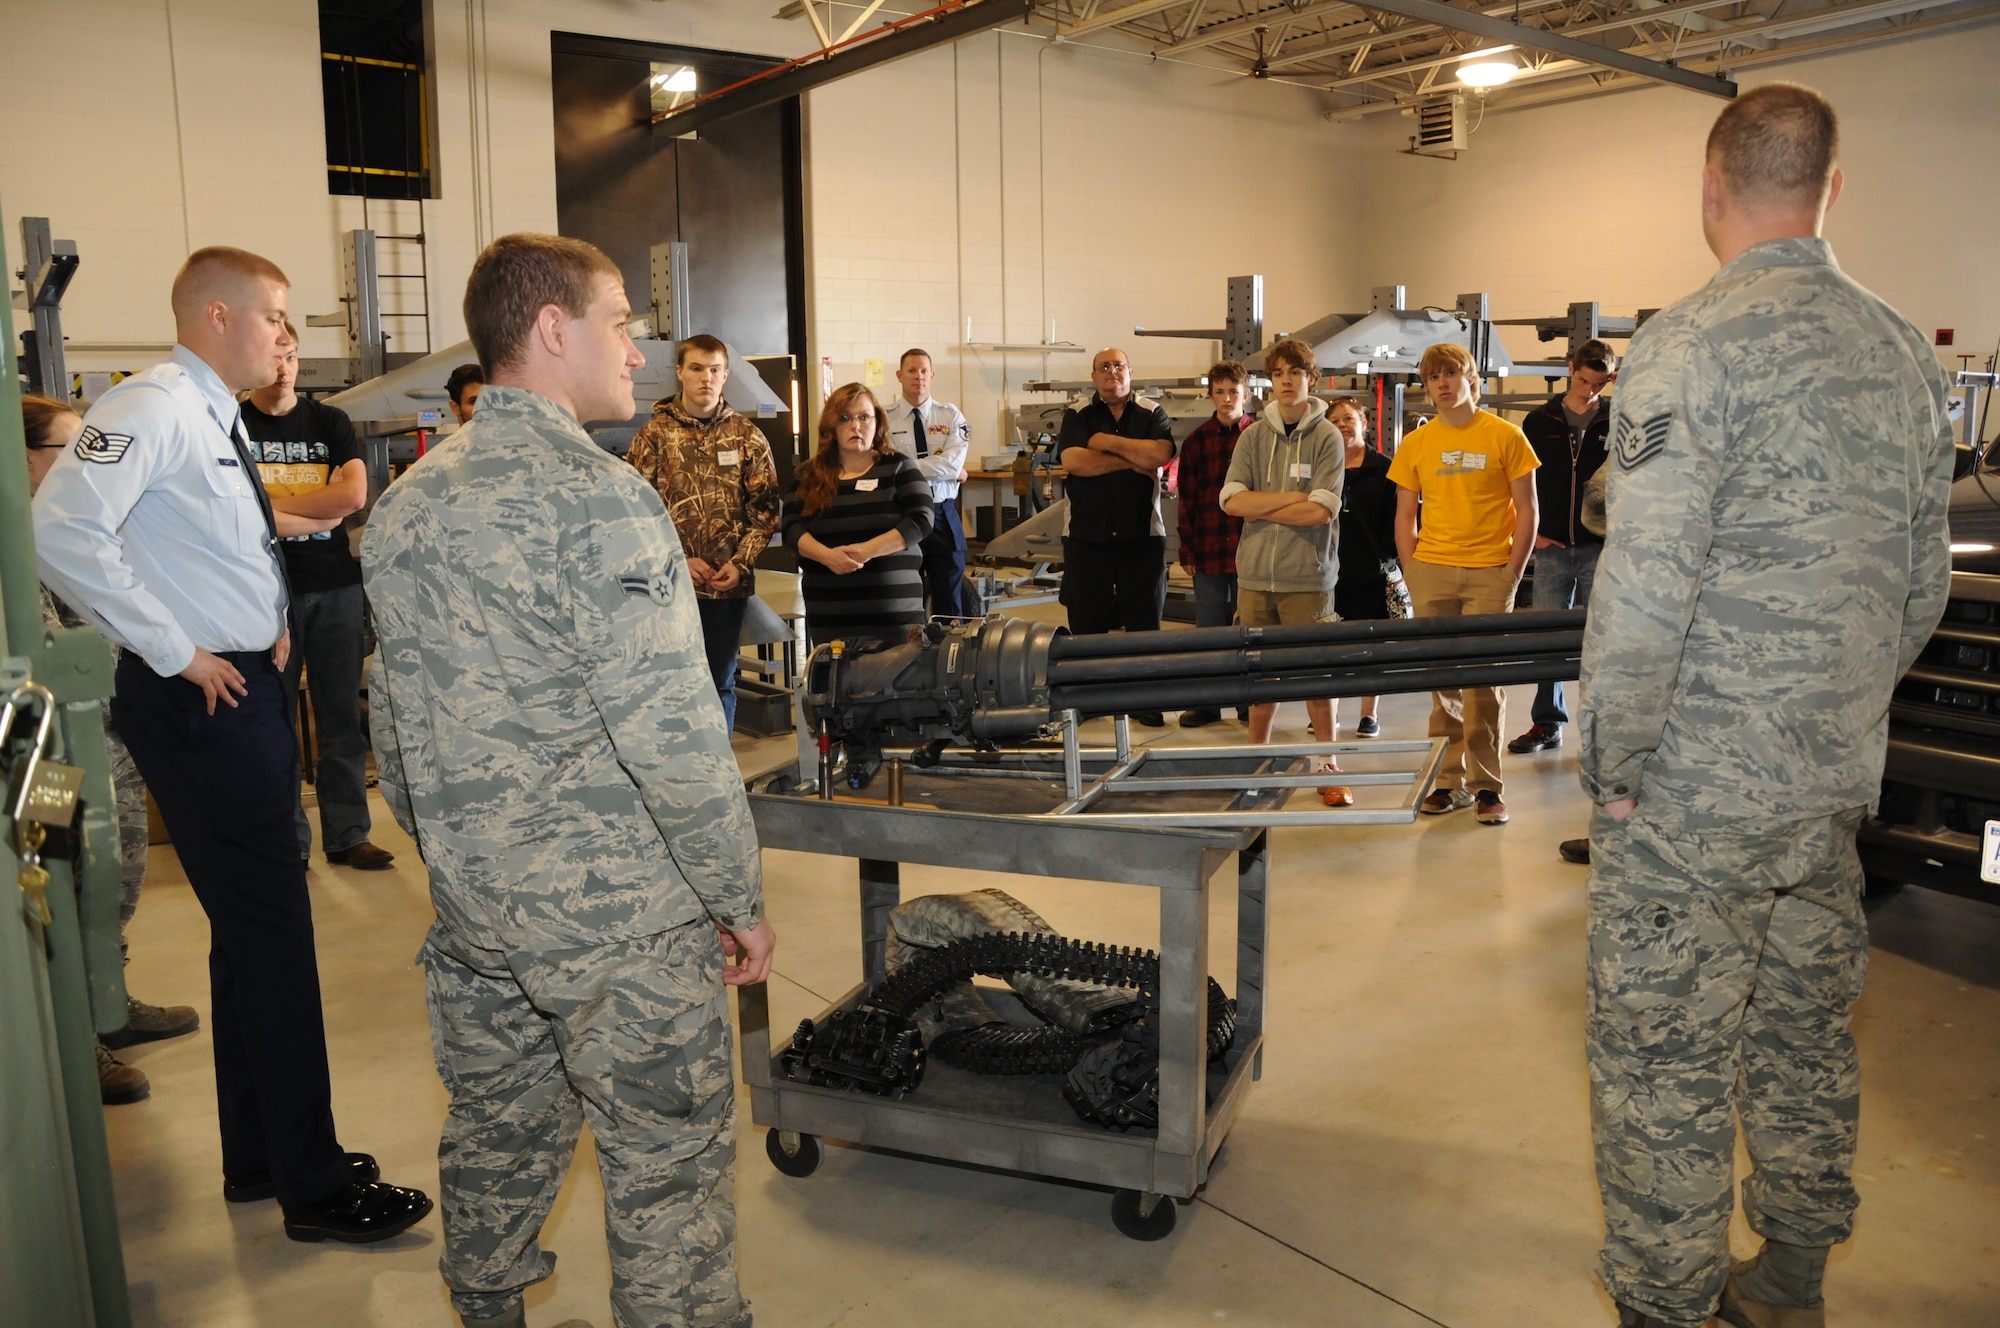 High school students and their parents listen to Airmen from the 114th Fighter Wing weapon shop during the 2015 South Dakota Air National Guard Career Day at Joe Foss Field, S.D., April 29, 2015. The event was held to showcase the many careers within the South Dakota Air National Guard to area high school seniors and juniors.  (National Guard photo by Senior Airman Duane Duimstra/Released)